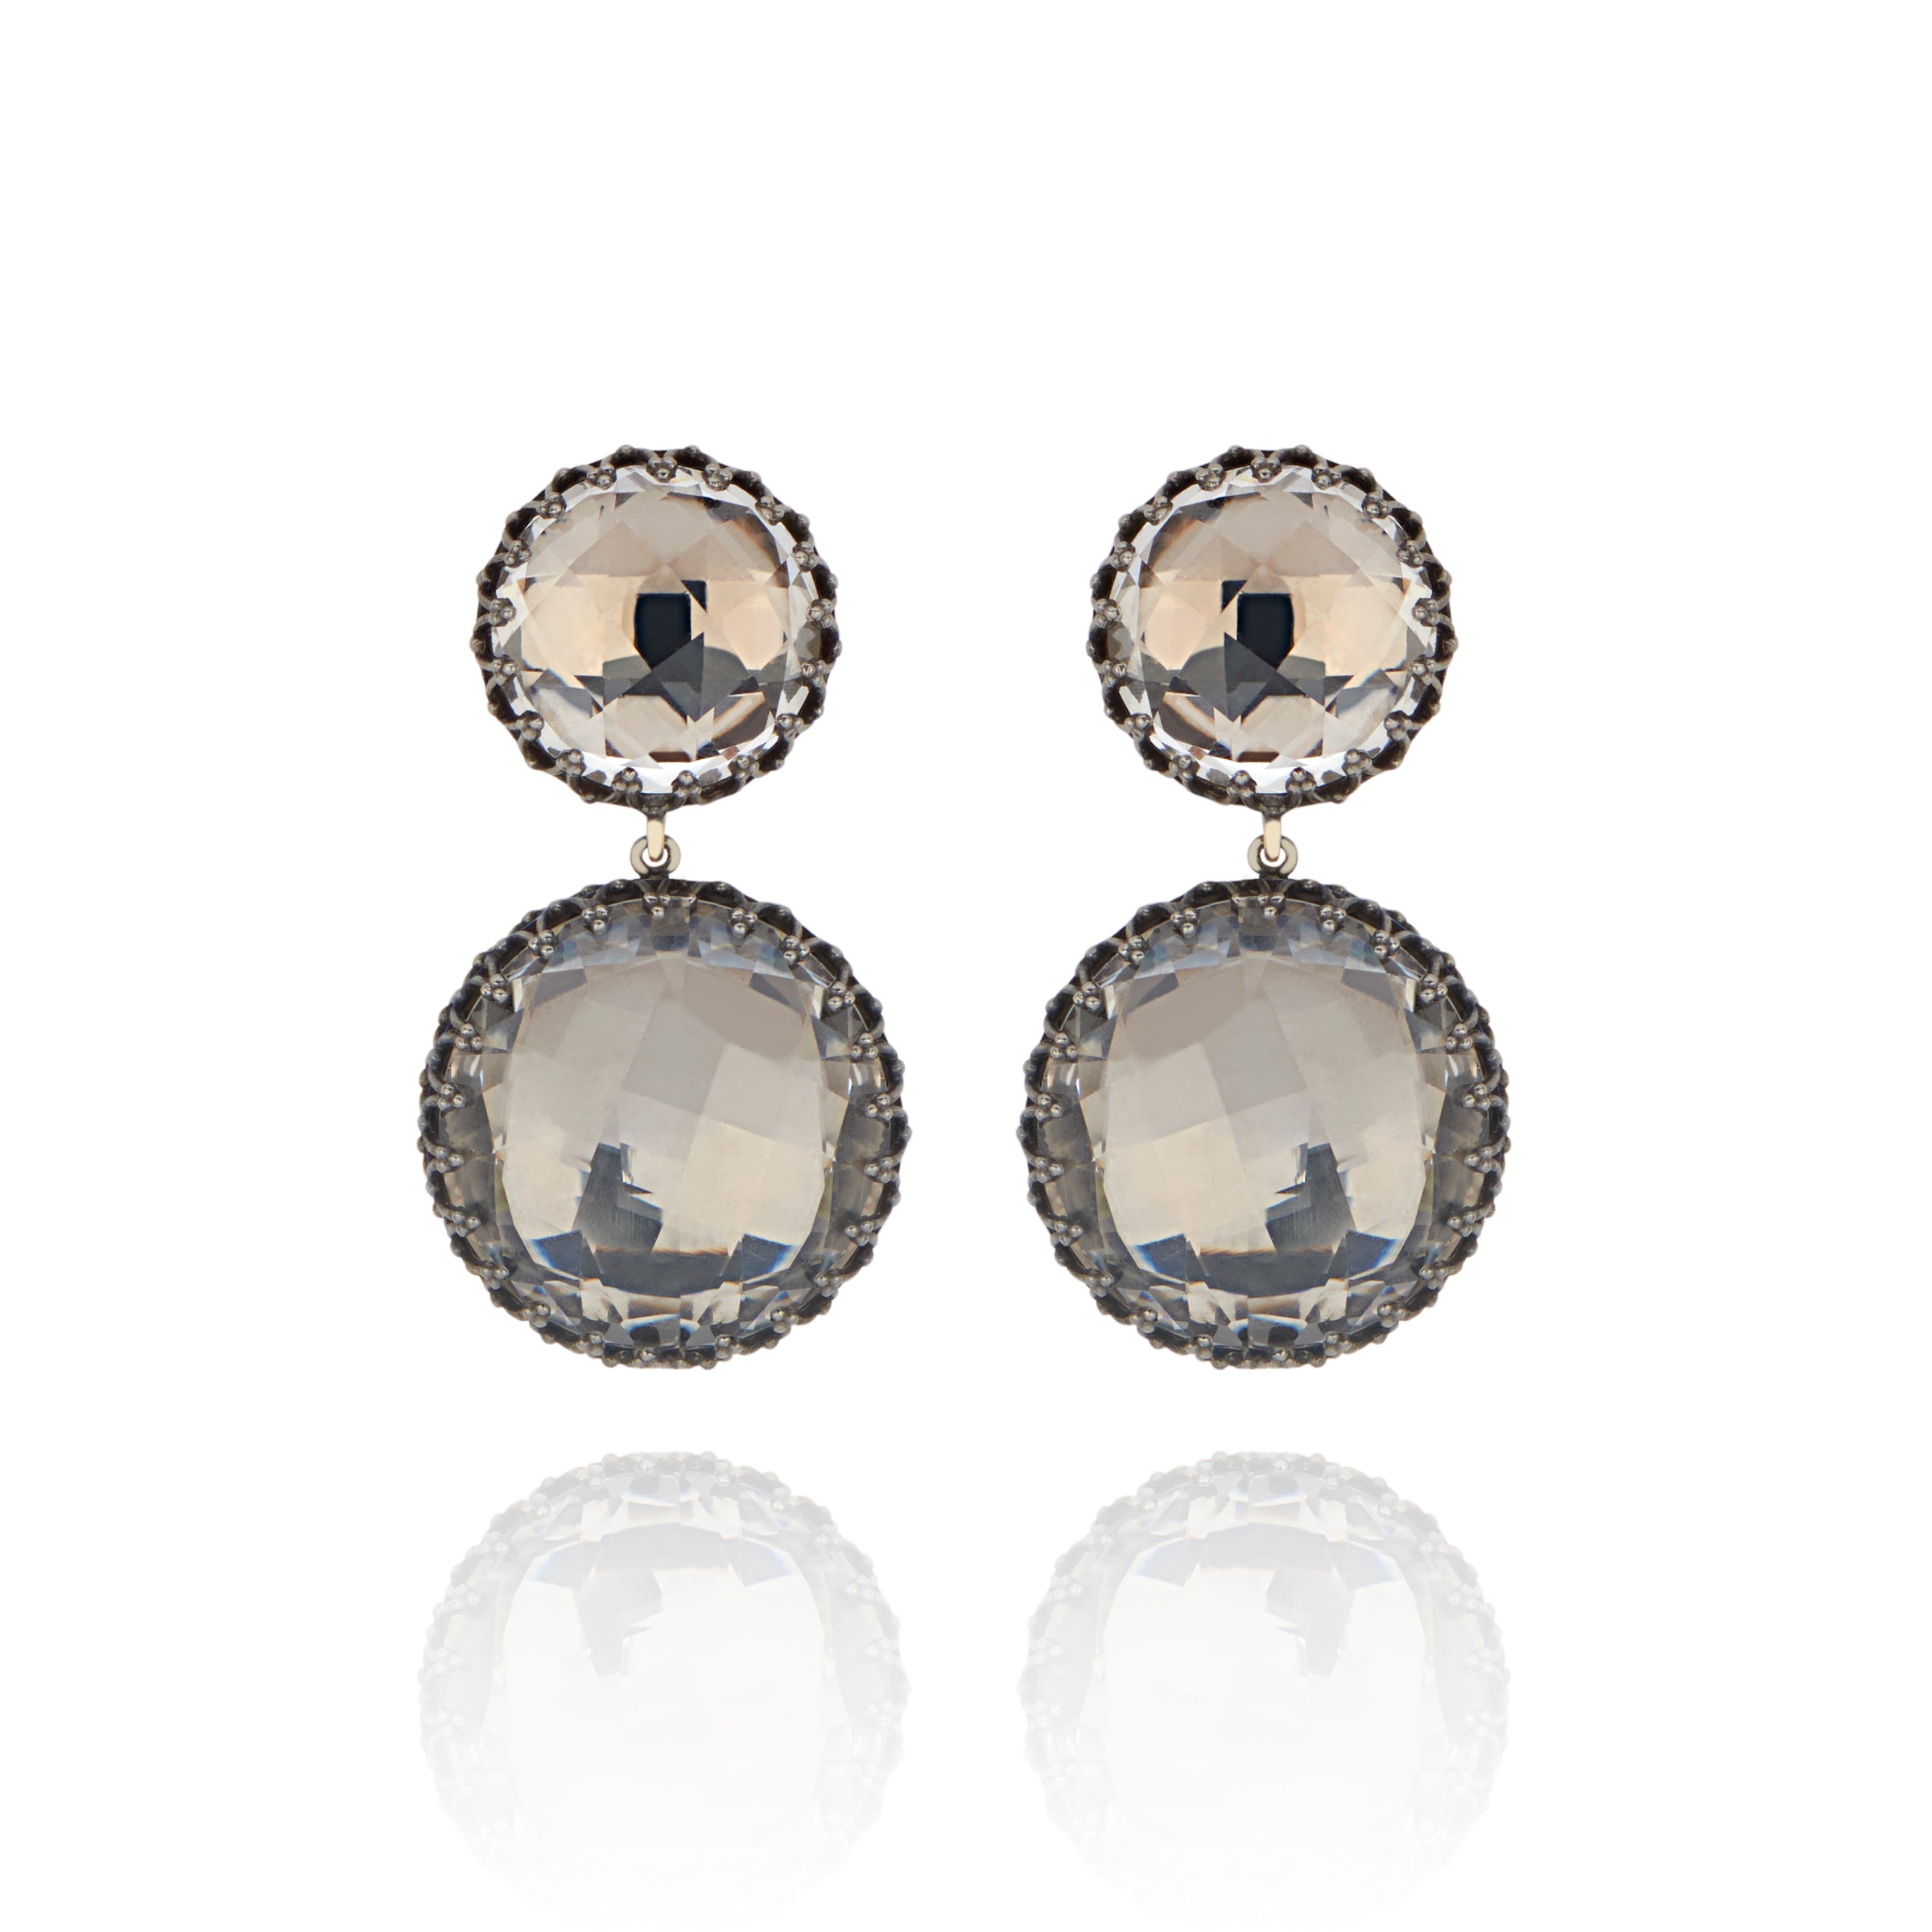 Olivia Large Day Night Earrings (Black Rhodium or Yellow Gold Wash)